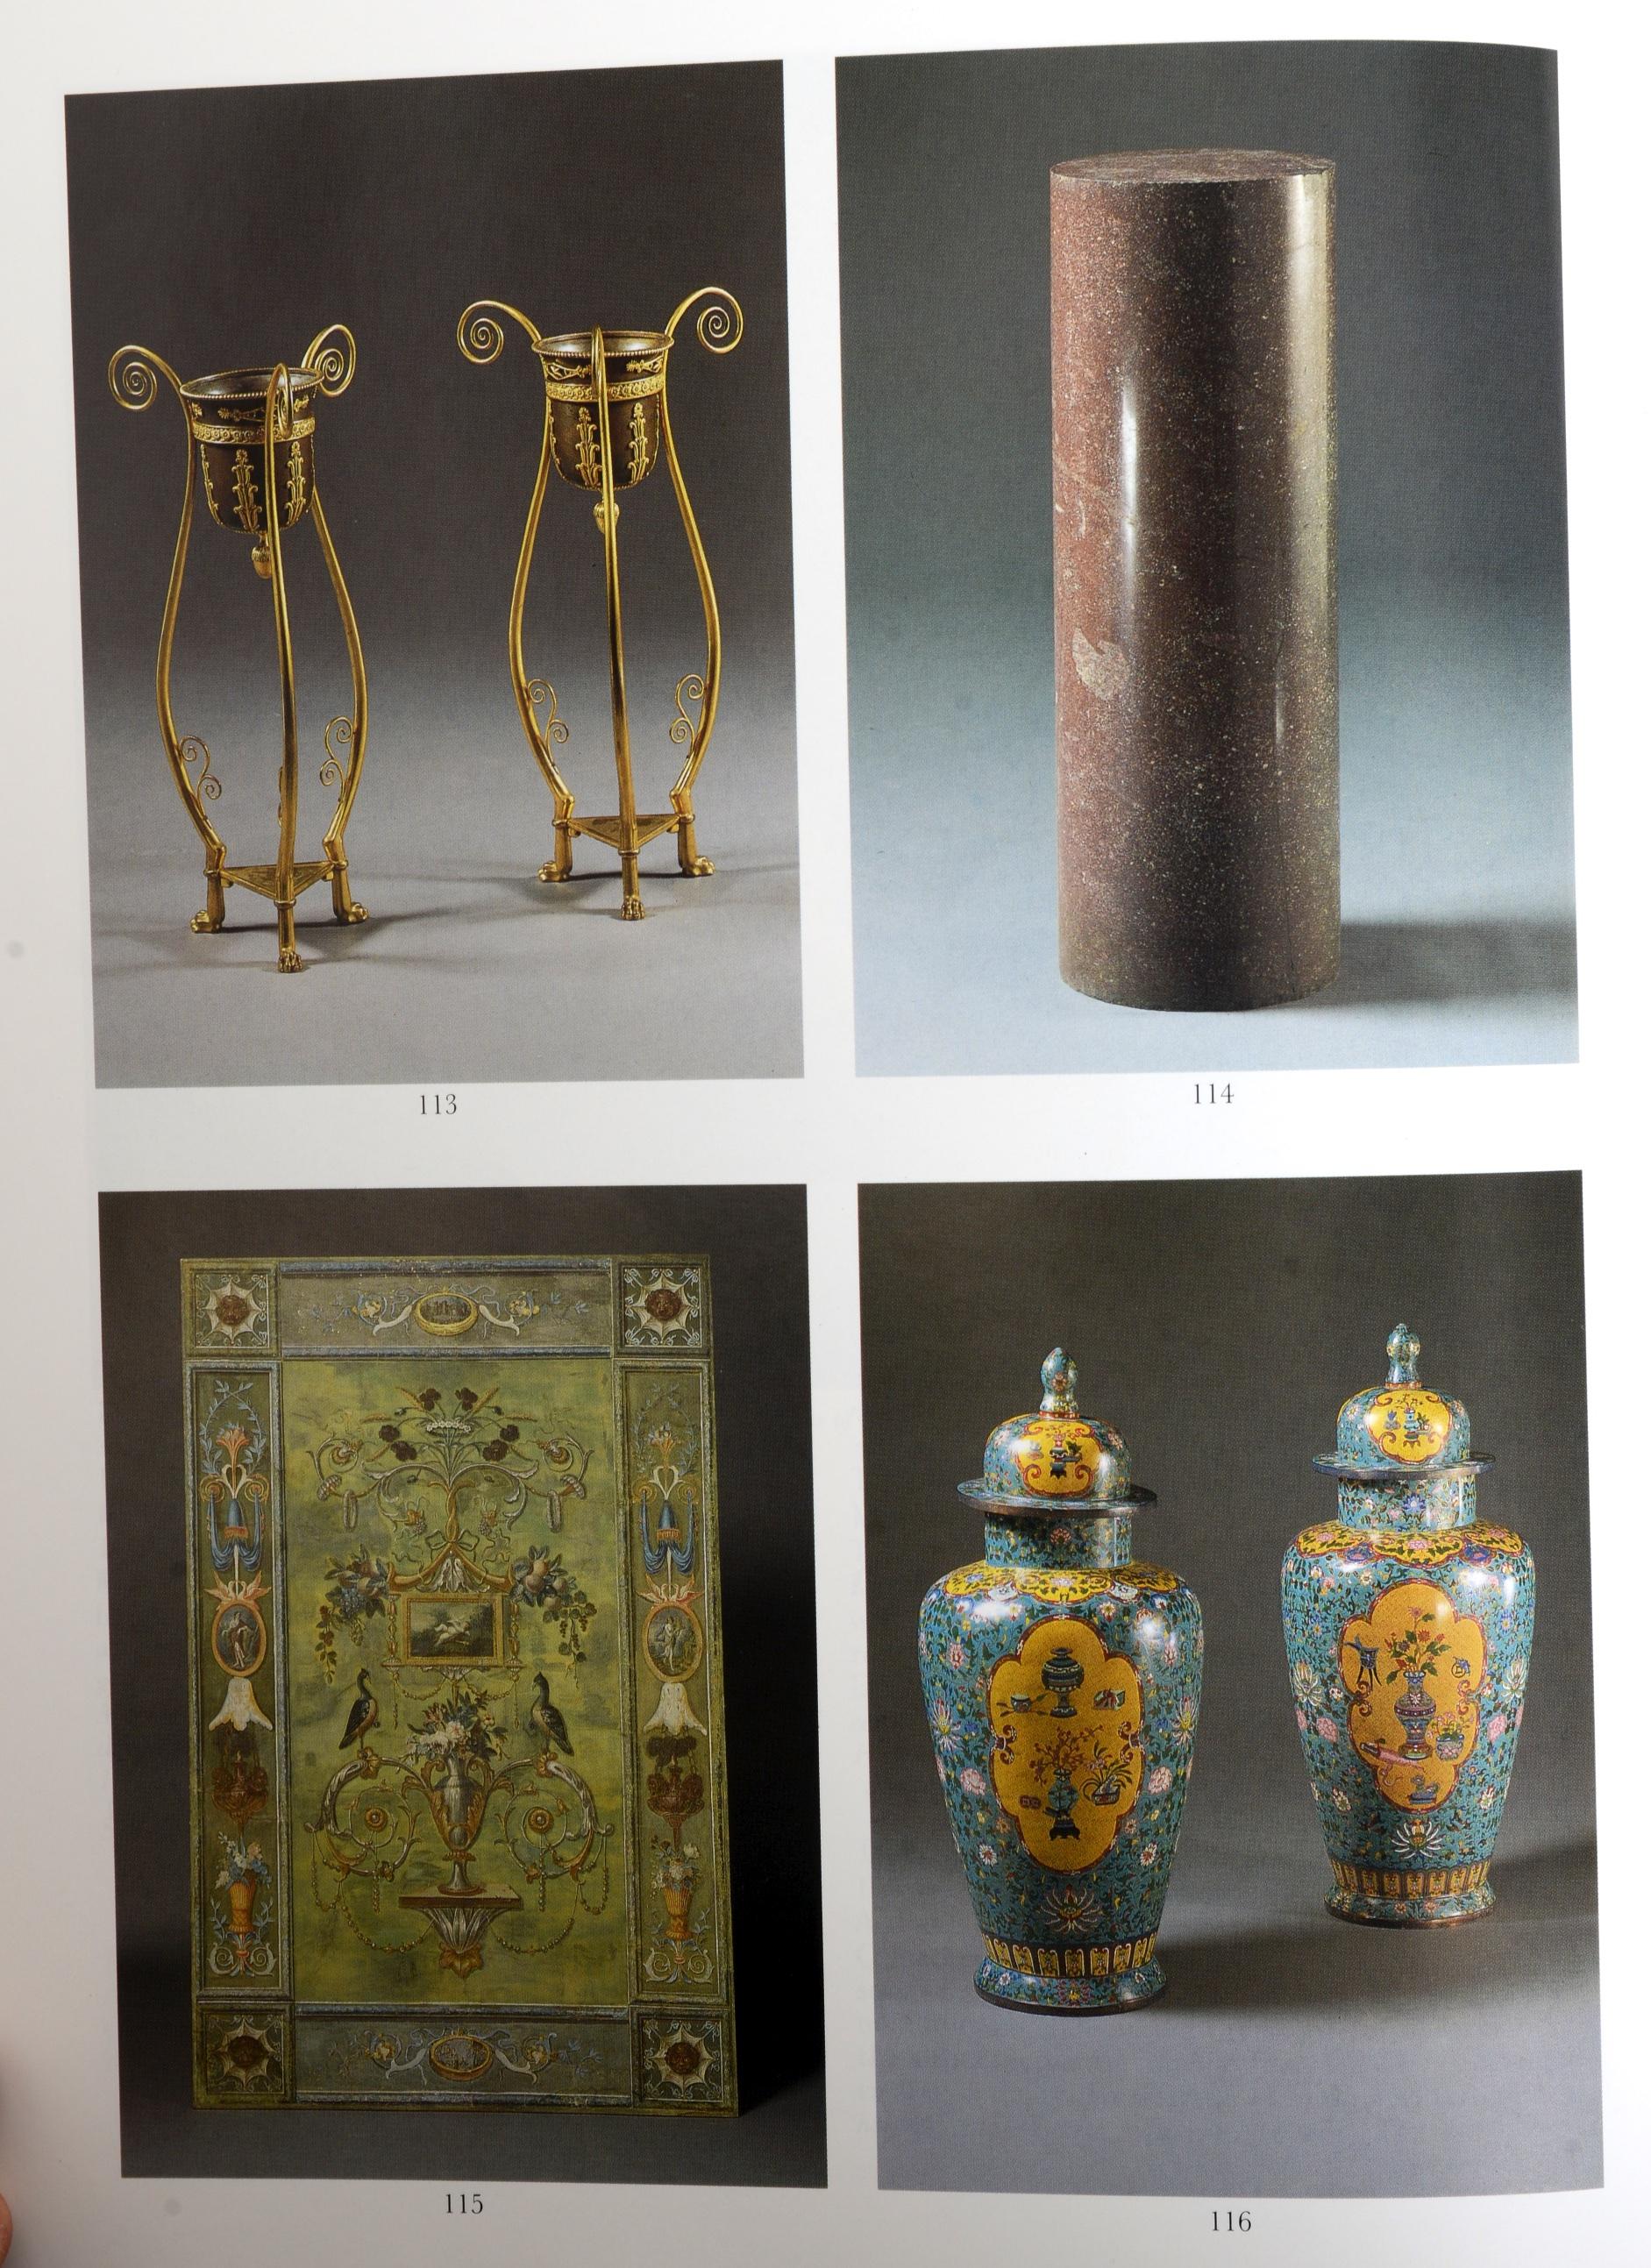 American Sotheby's A Collection from The Estate of William Randolph Hearst, Jr.